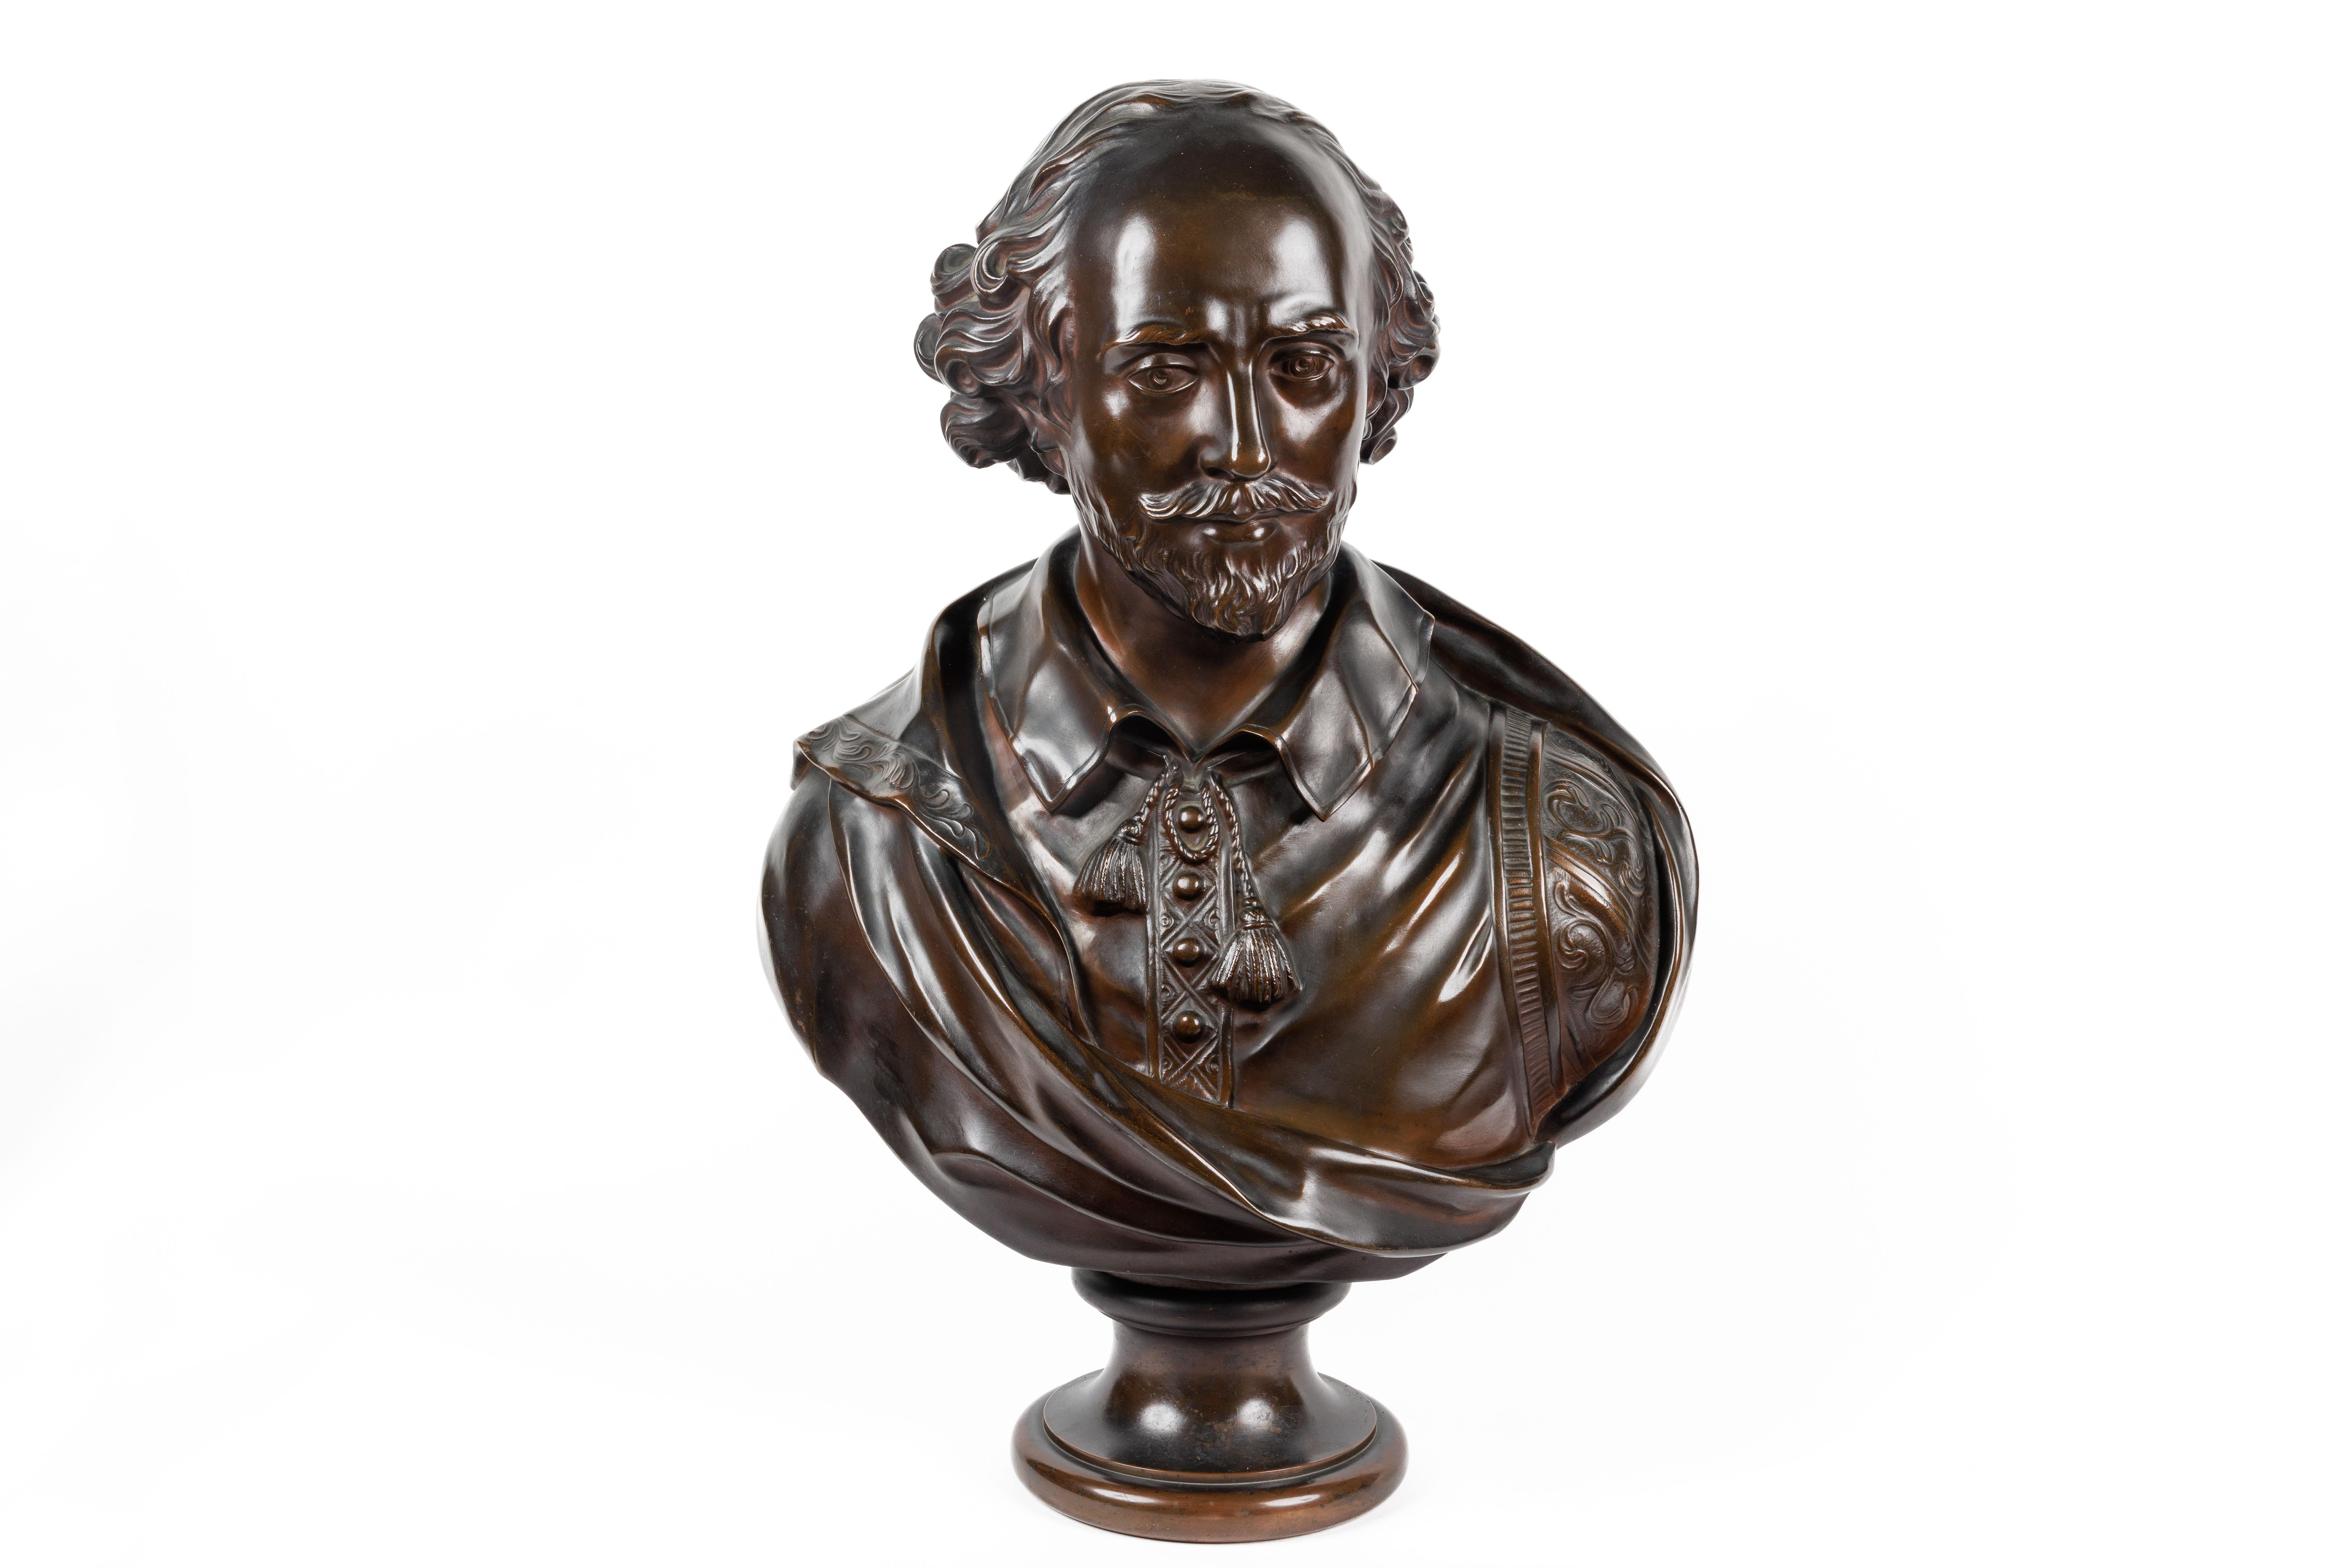 A monumental French patinated bronze bust of William Shakespeare, after Houdon, by F. Barbedienne Foundry, circa 1870.

Masterfully and realistically sculpted in solid bronze, this bust will place very well as a centerpiece in any home or